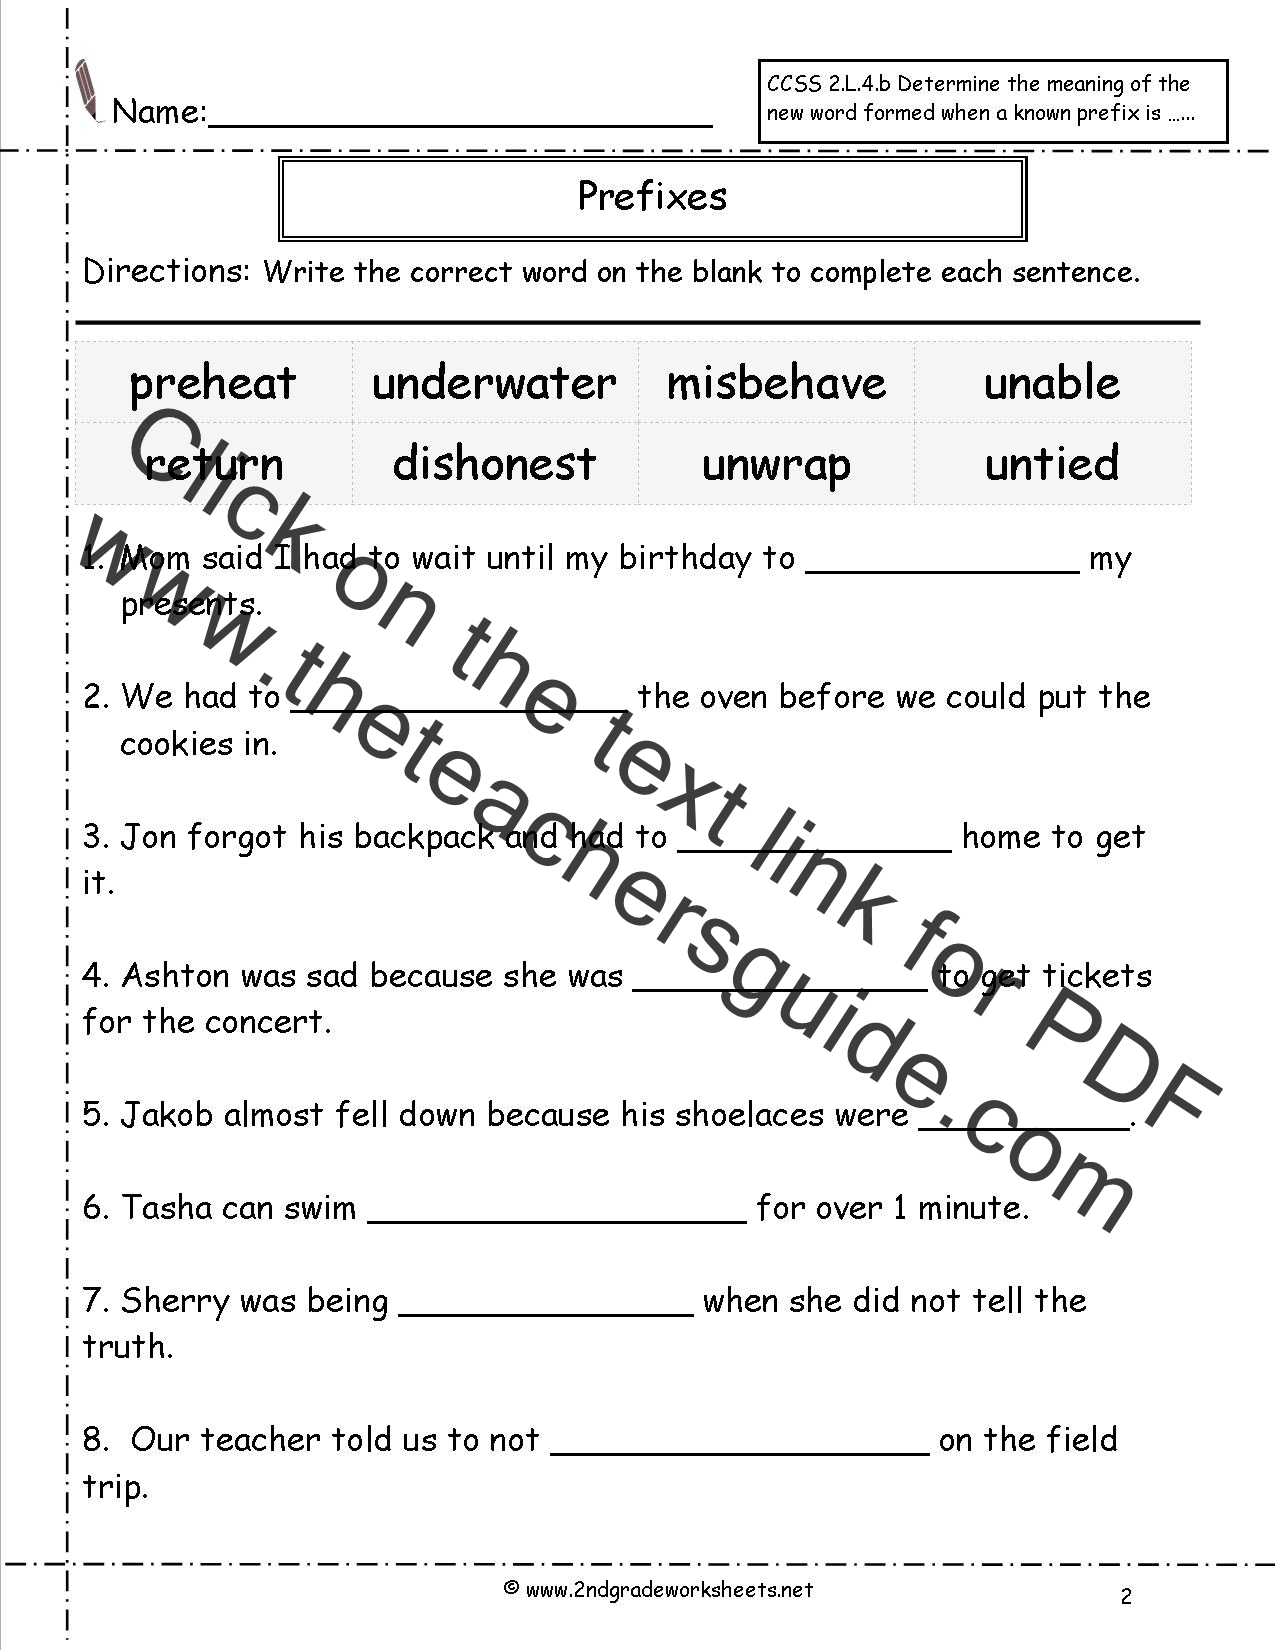 Second Grade Prefixes Worksheets Pertaining To Prefixes Worksheet 2nd Grade